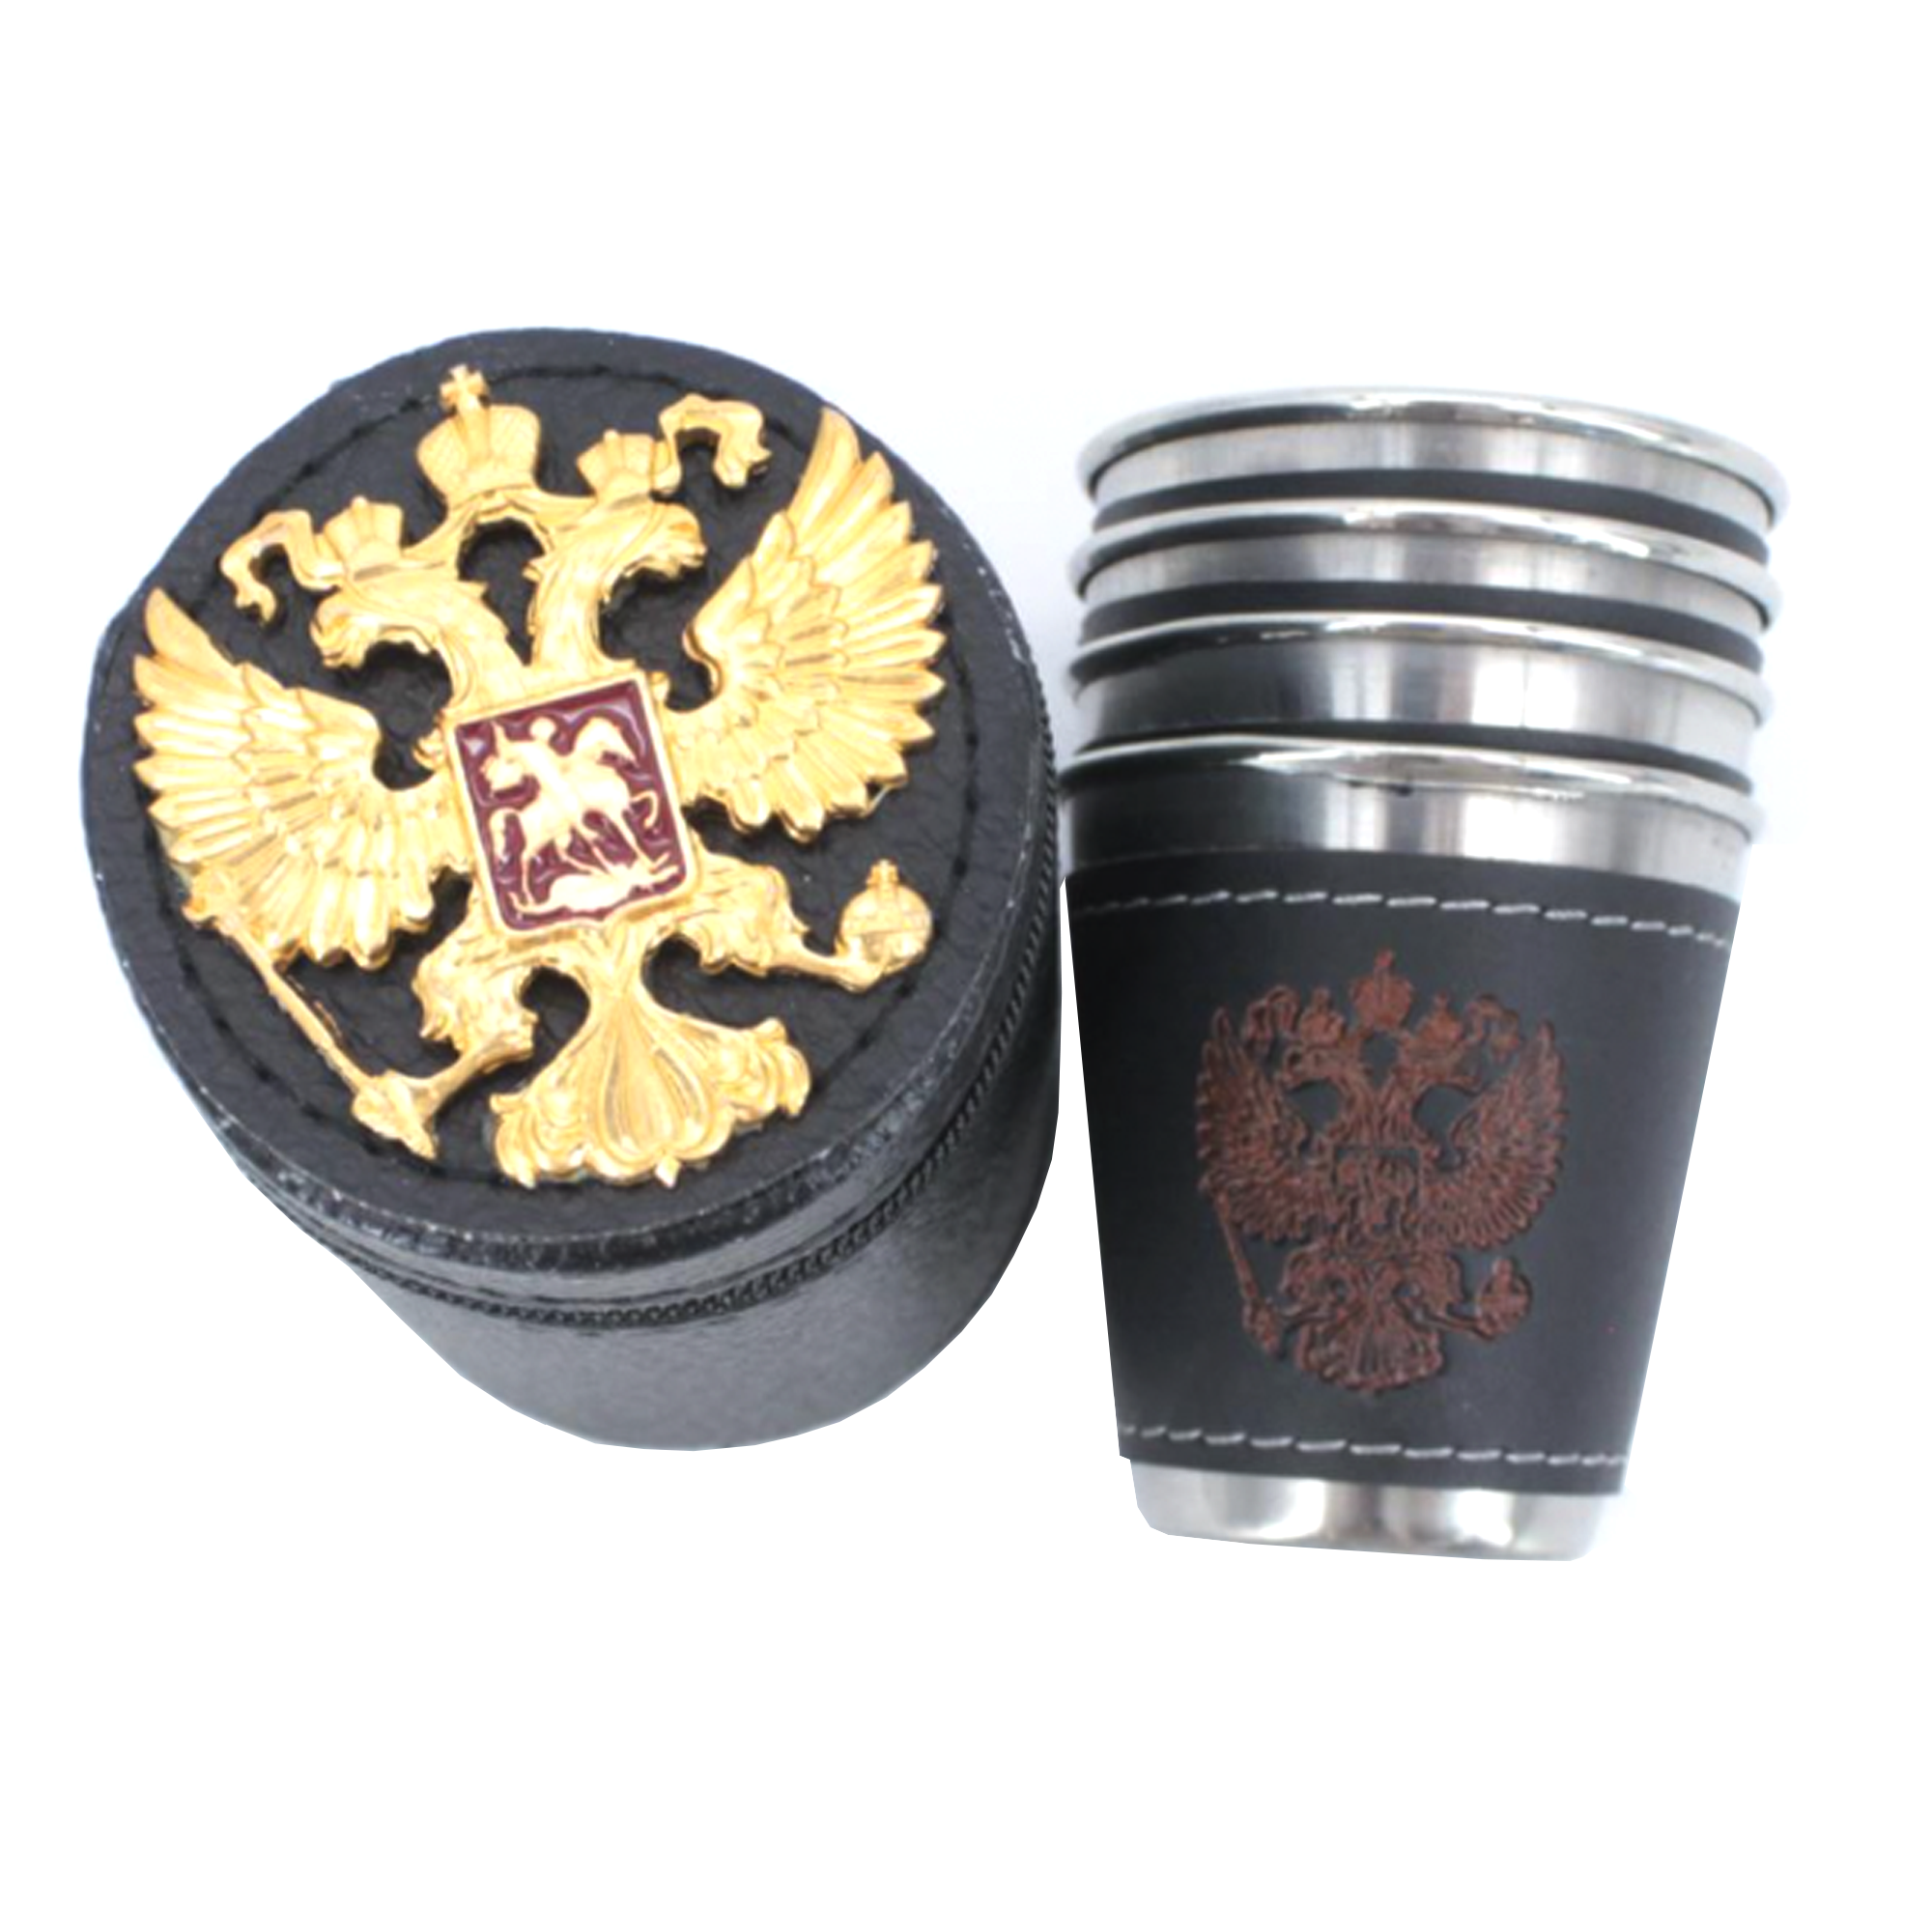 Stainless Steel Shot Glass Russian Symbols 4 items in Сase, 30ml